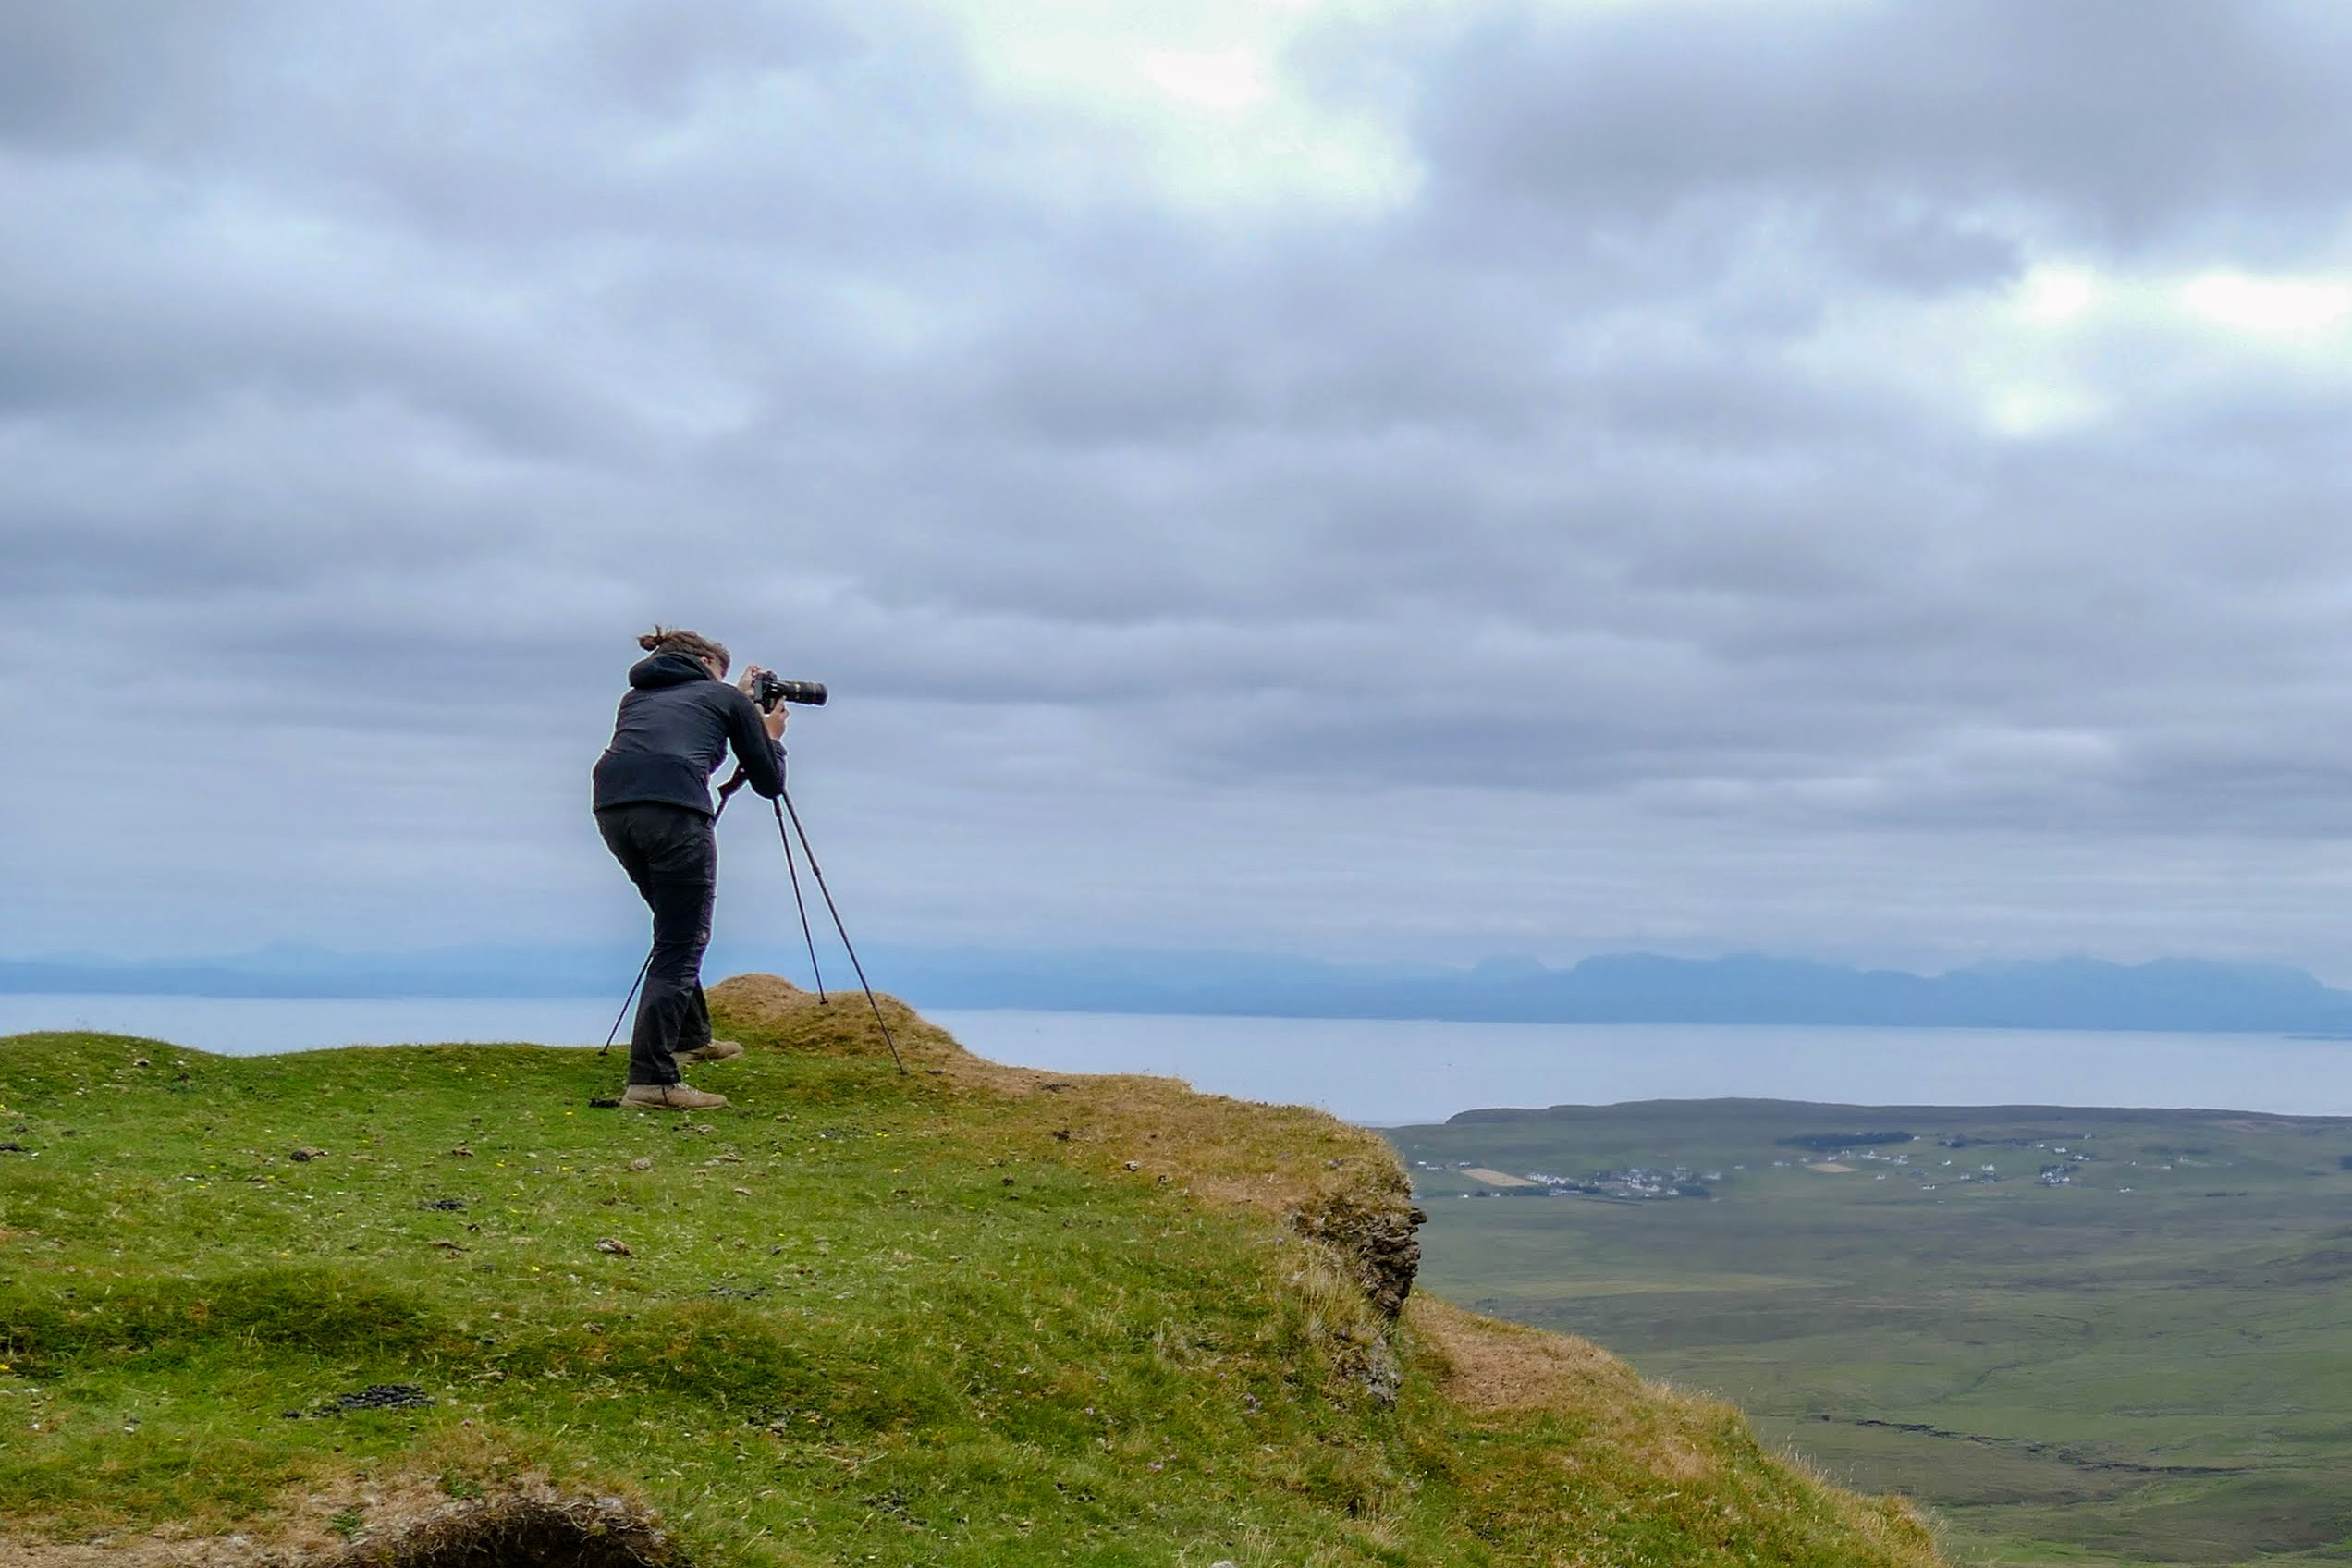 Me taking a picture of the amazing Scottish landscape